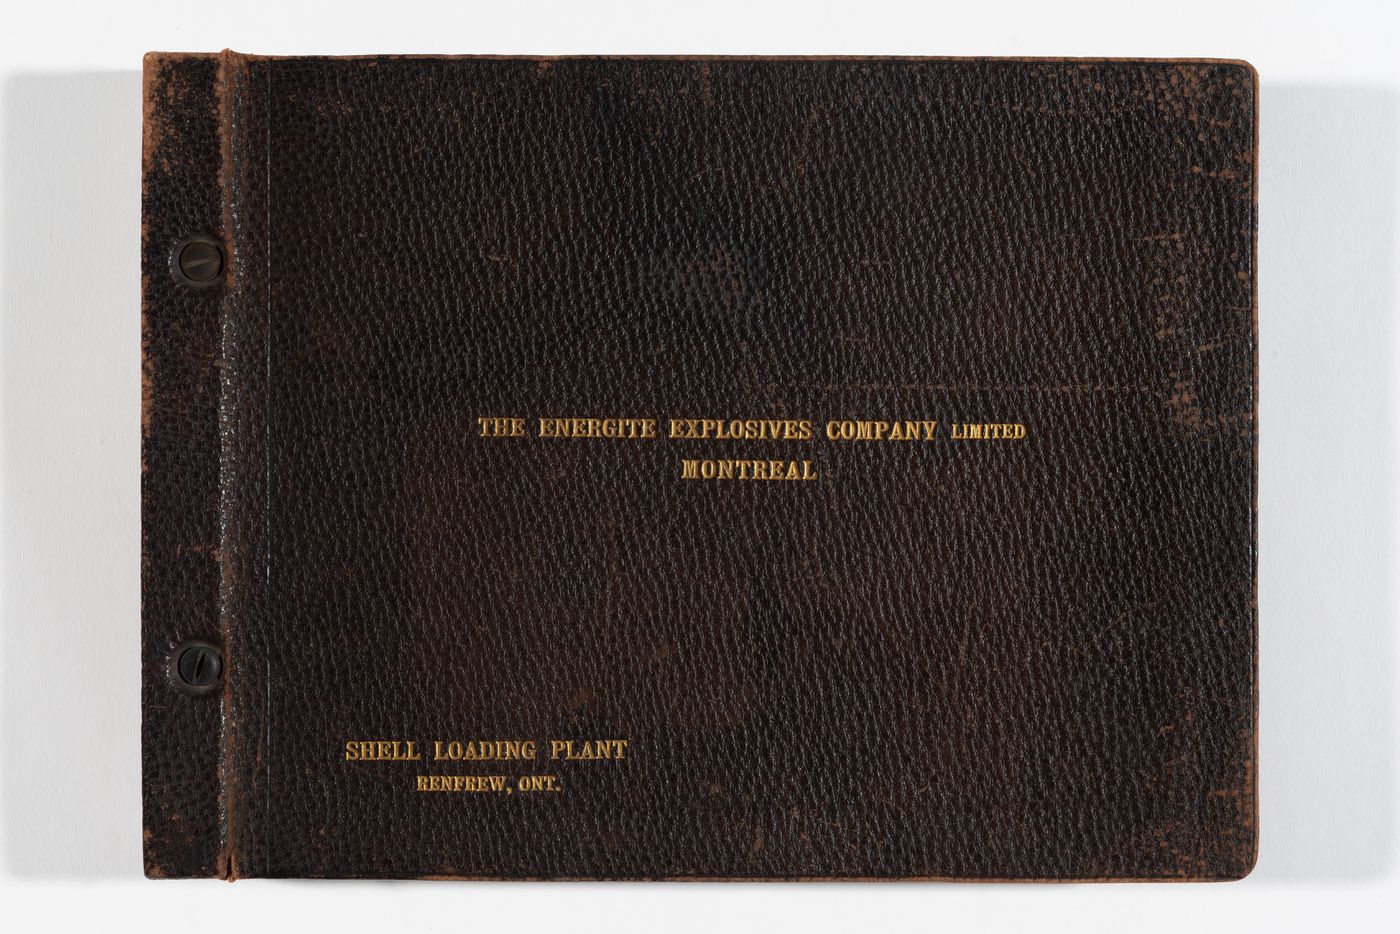 Album of portraits of employees and directors of the Energite Explosives Company and exterior and interior views of the architecture and operations of Energite Explosives Plant No. 3, the Shell Loading Plant, Renfrew, Ontario